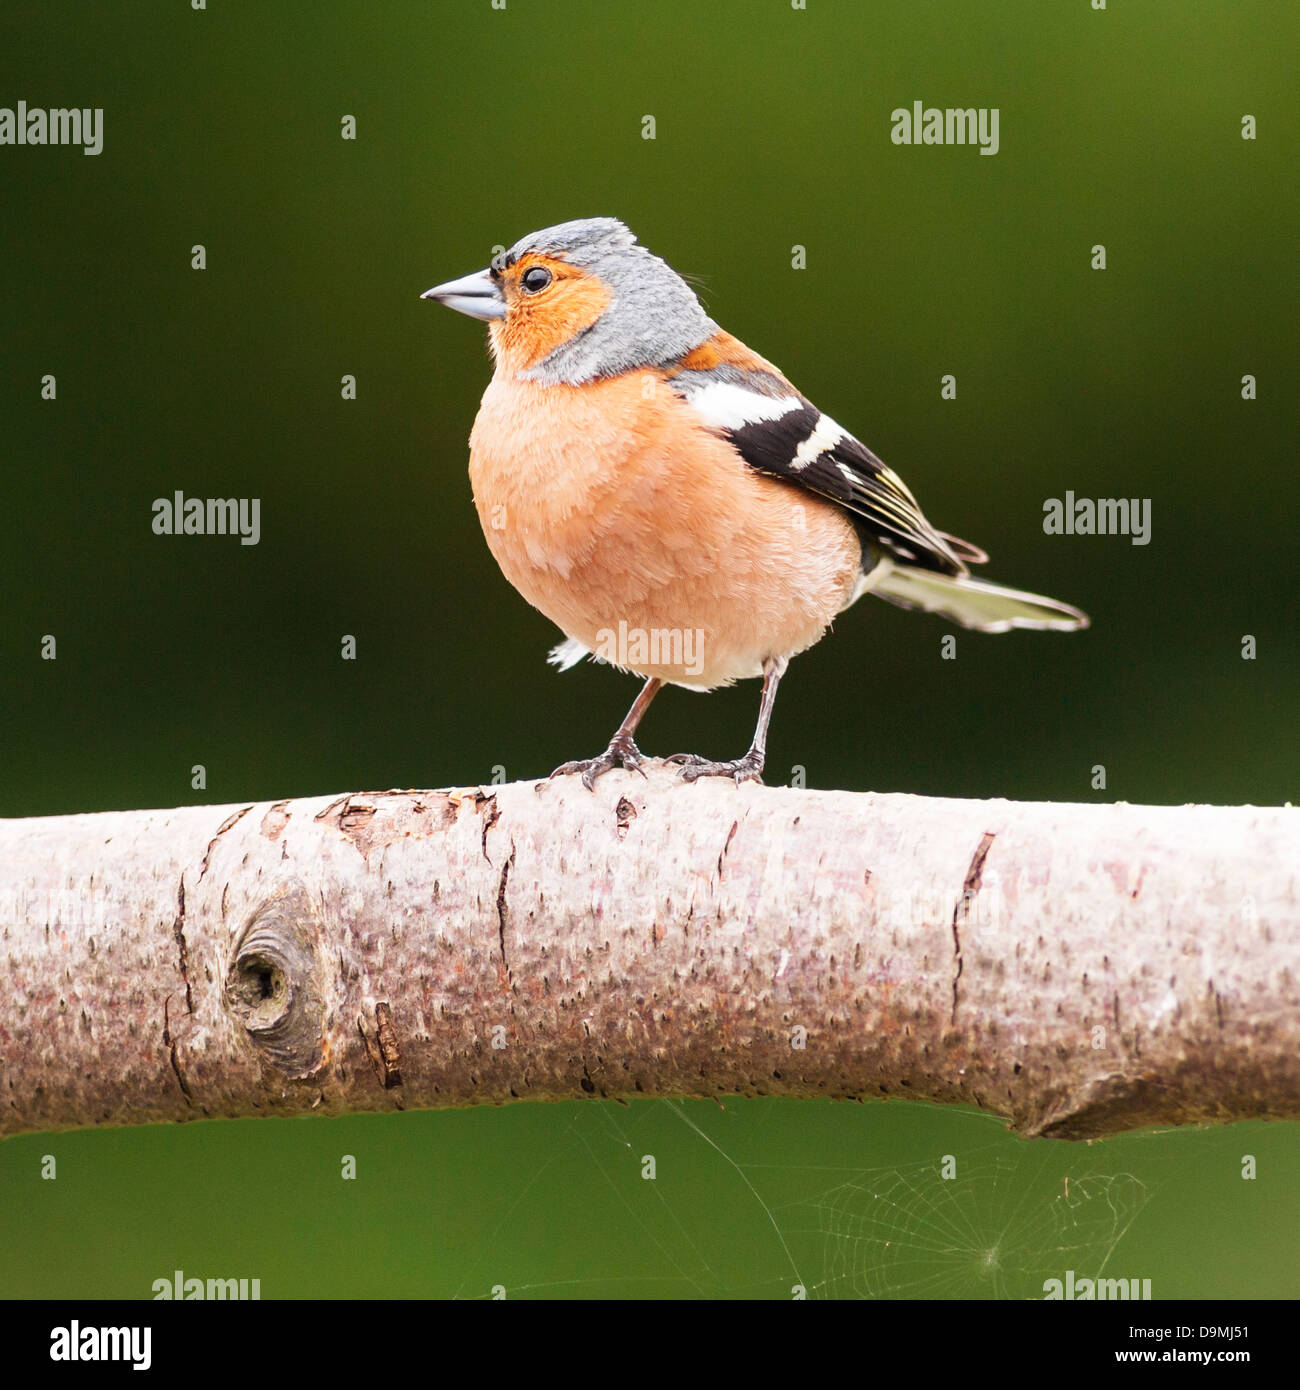 A Male Chaffinch (Fringilla coelebs) in the uk Stock Photo